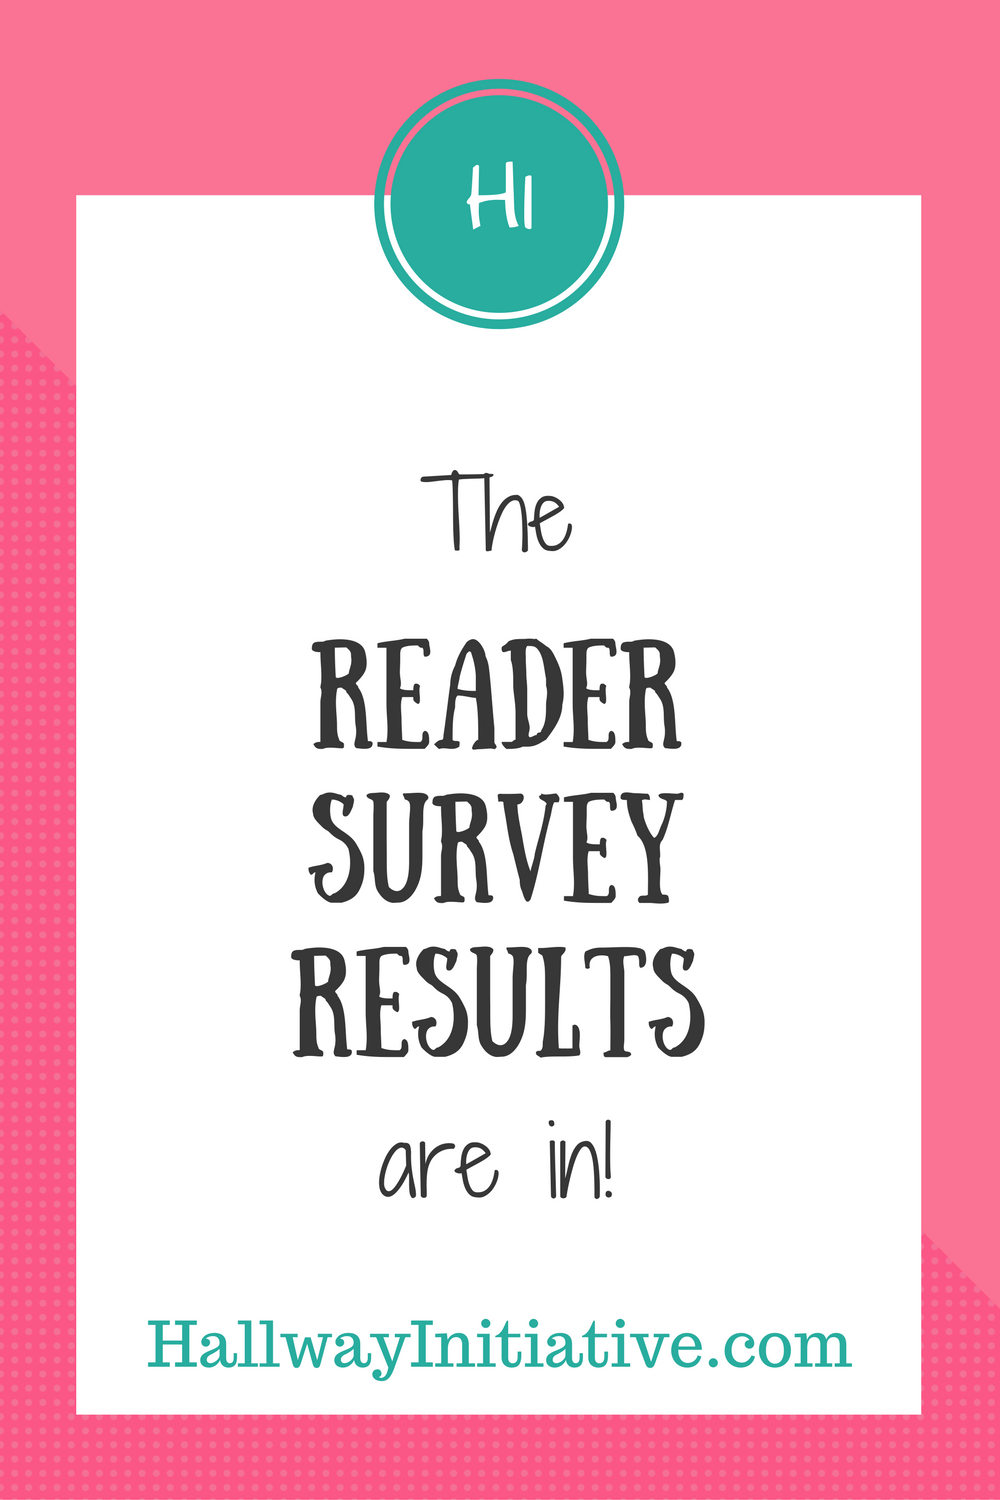 The reader survey results are in